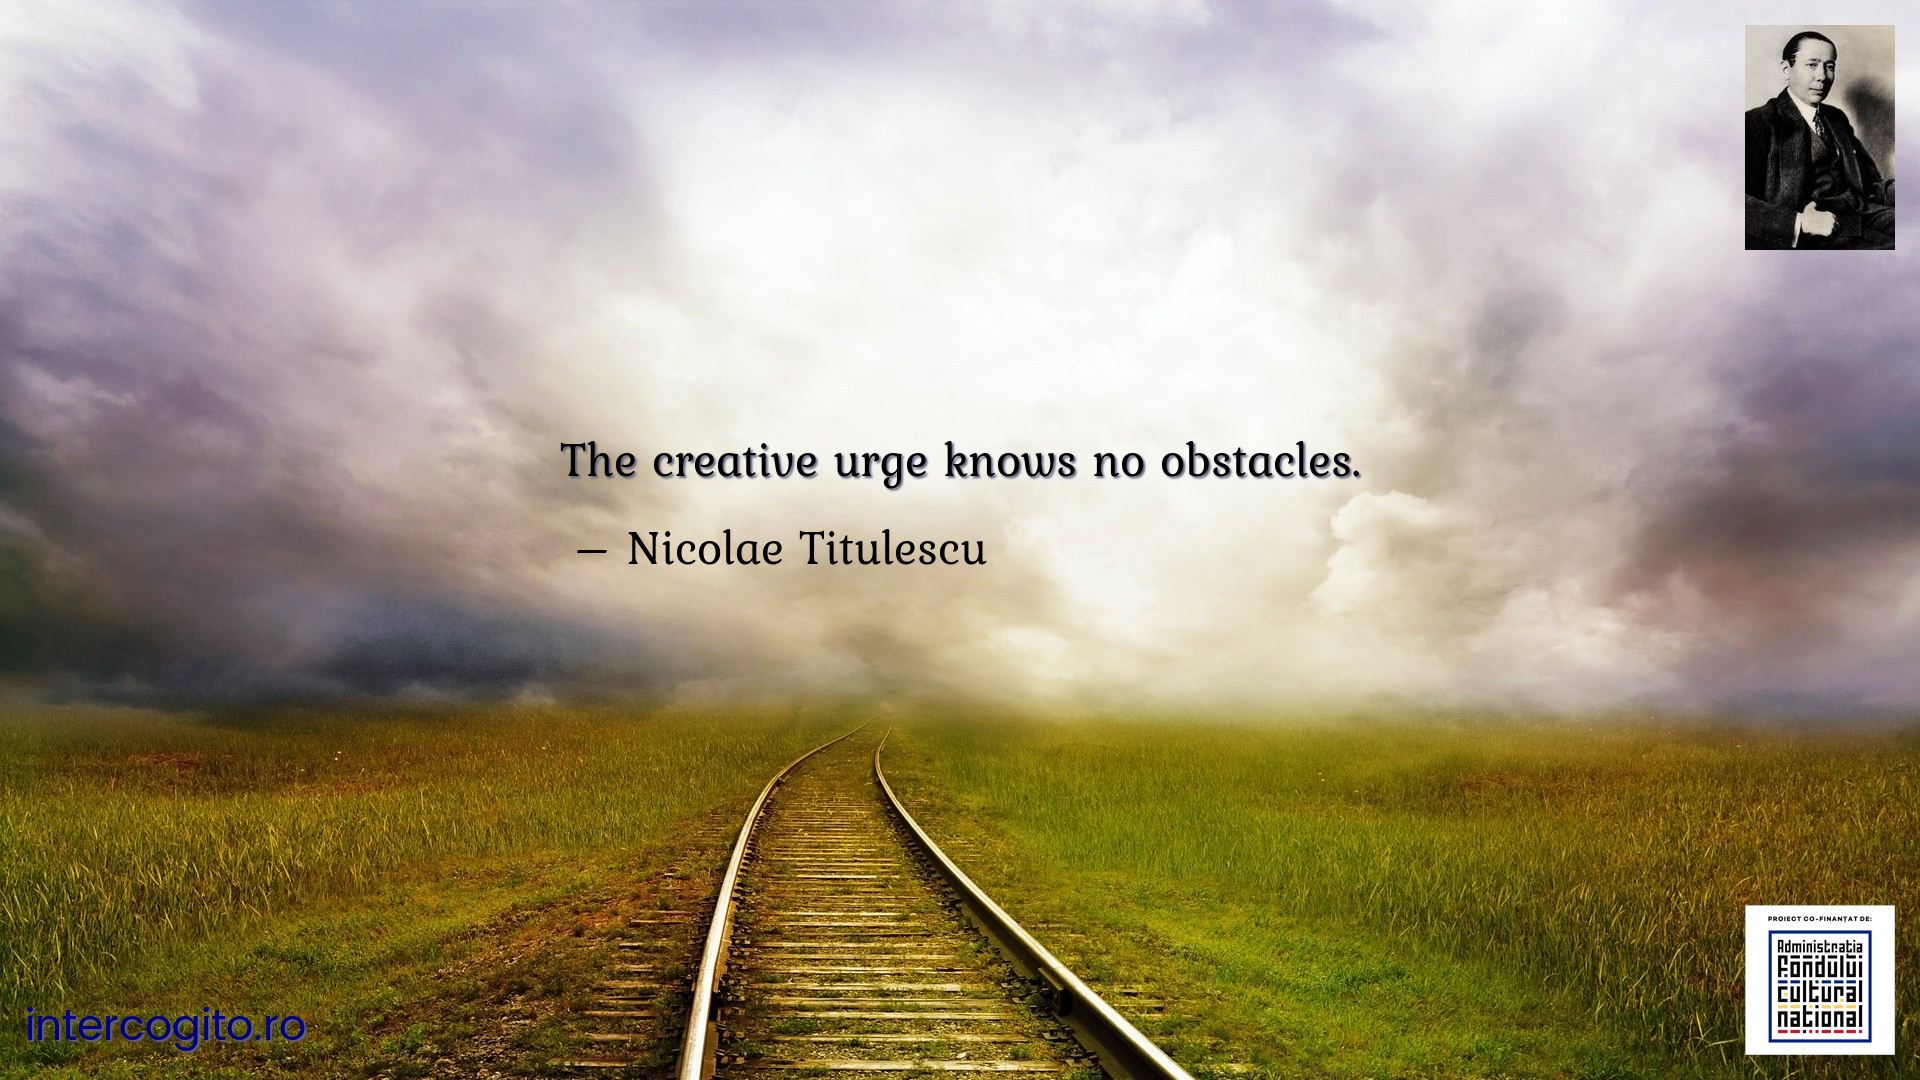 The creative urge knows no obstacles.